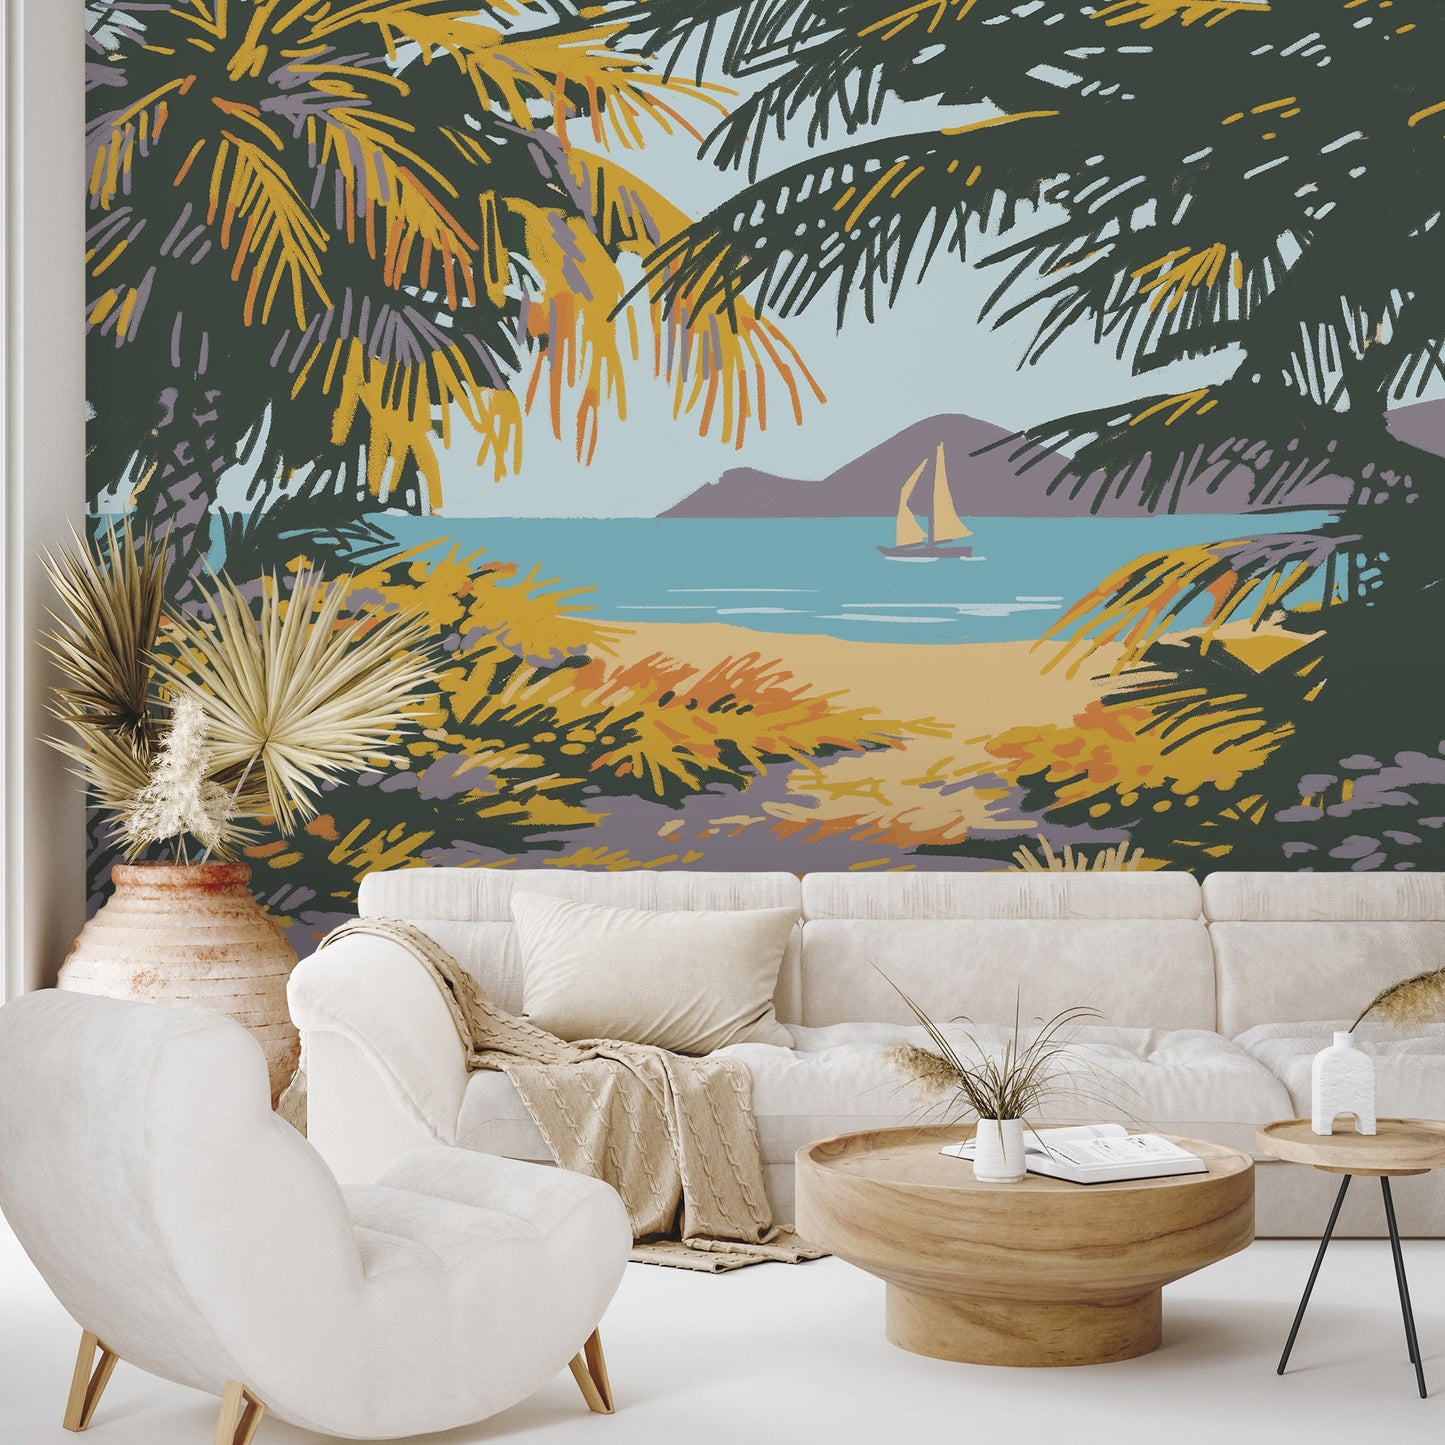 Peel & Stick Wall Mural - Virgin Islands National Park By Anderson Design Group